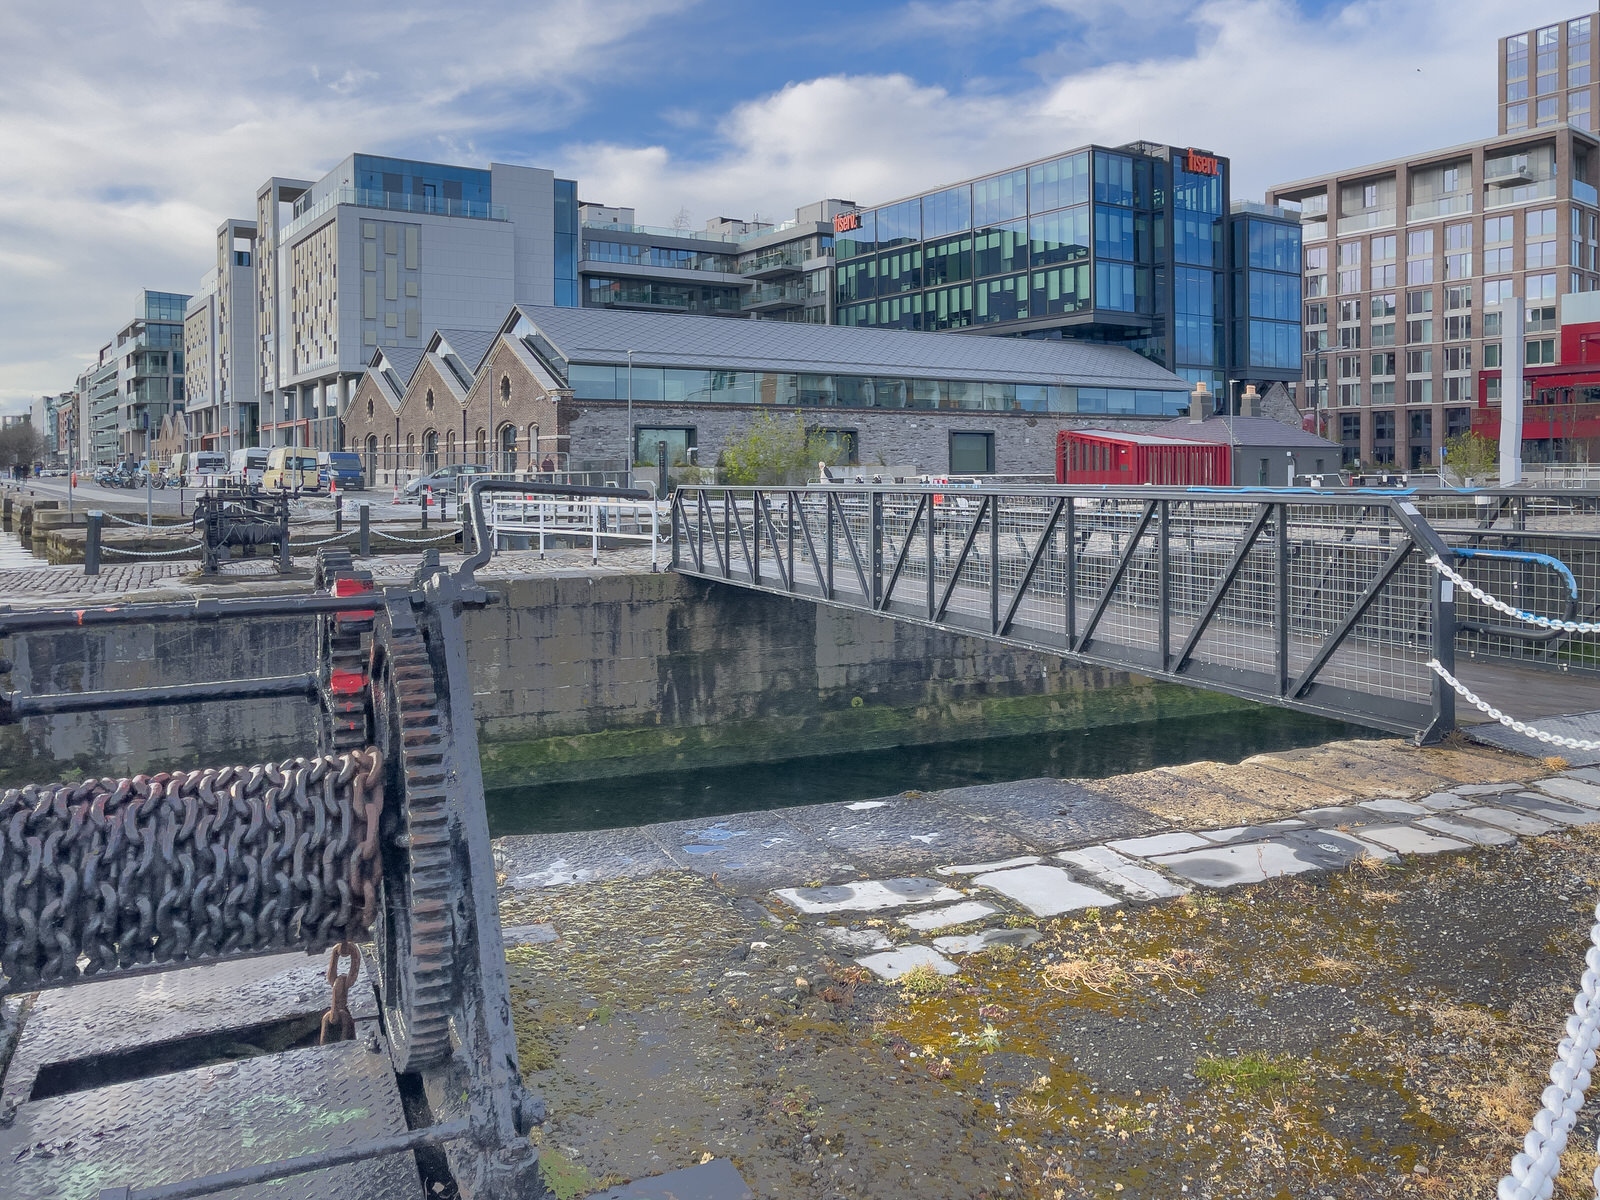 GRAND CANAL DOCK 25 MARCH 2023